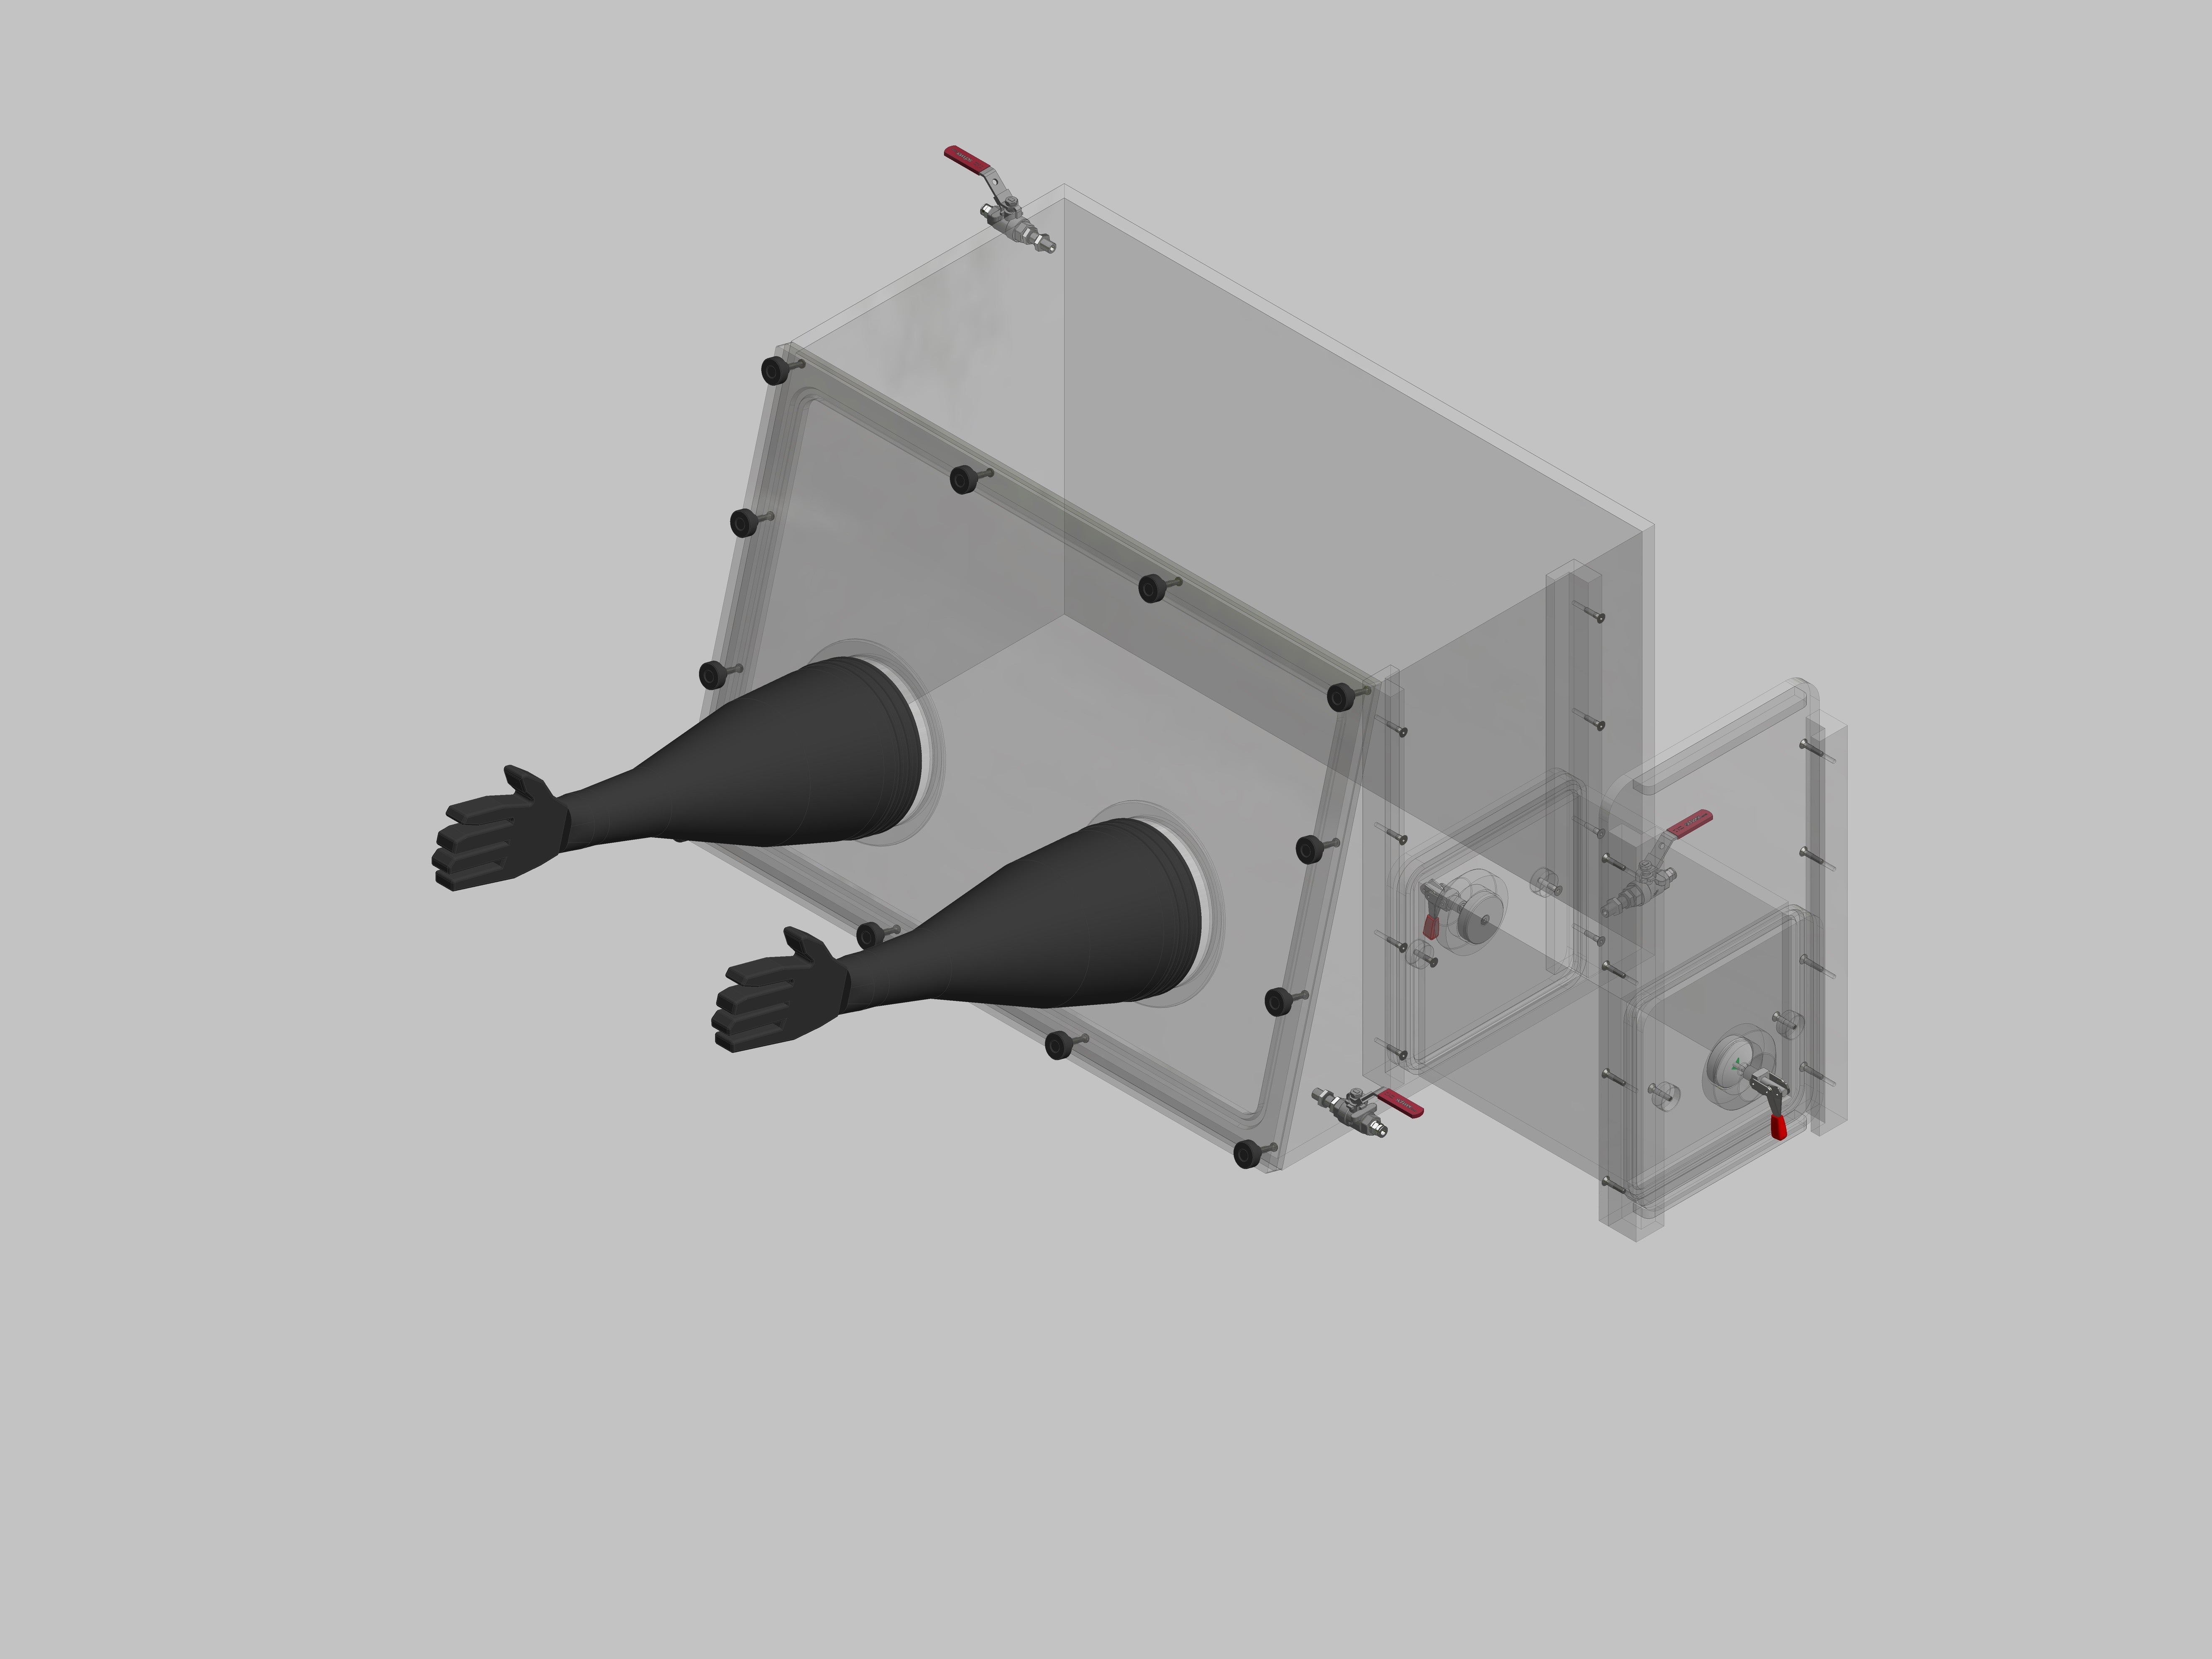 Glovebox made of acrylic &gt; Gas filling: by hand, front design: removable, side design: rectangular lock